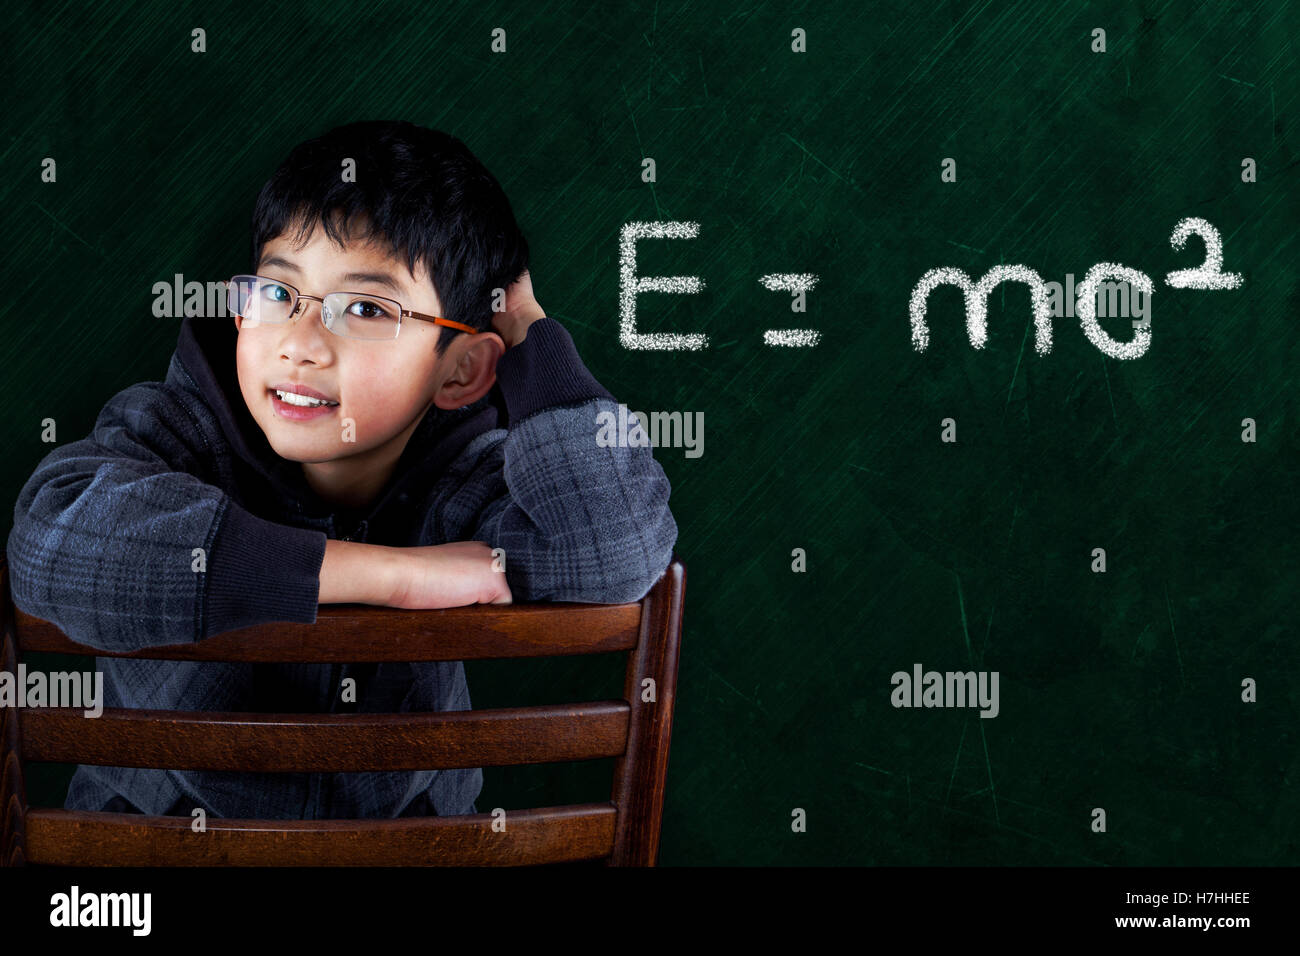 Smart Asian boy sitting on classroom chair with Math equation on chalkboard background and copy space. Stock Photo